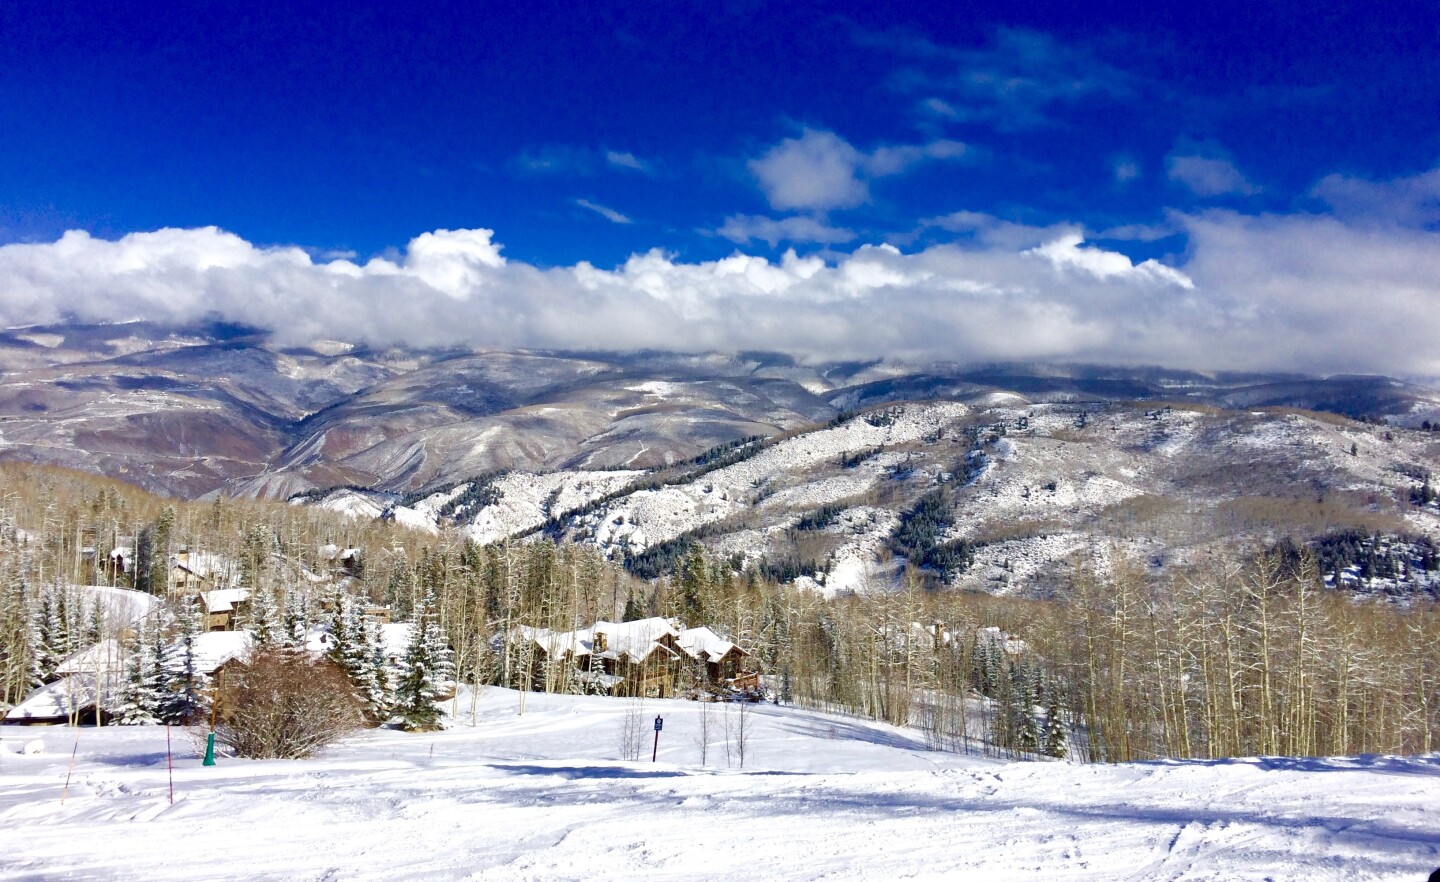 <h2>3. Beaver Creek</h2> <ul>   <li><b>Location: </b>Avon, Colorado</li>   <li><b>Best for: </b>Families who prefer the luxury ski experience; multi-generational ski groups, beginners and intermediate skiers; Epic Pass holders </li>   <li><b>Where to stay:</b> <a class="Link" href="https://www.ritzcarlton.com/en/hotels/whrrz-the-ritz-carlton-bachelor-gulch/overview/" rel="noopener">The Ritz-Carlton, Bachelor Gulch: </a>Resembling a National Park lodge, this Ritz-Carlton property has three separate slope-side hot tubs and a year-round heated pool, a fireside bar and lounge area, and a Club Level lounge with après alpine fare, like gourmet hot dogs and Bavarian-style pretzels.</li>  </ul> <p>Coupled with an<a class="Link" href="https://www.beavercreek.com/the-mountain/about-the-mountain/mountain-info.aspx" rel="noopener"> annual average of 323 inches of snow</a> and dazzling views of the Colorado Rockies, Beaver Creek mountain feels spread out and expansive with three distinct village areas (Beaver Creek, Bachelor Gulch, and Arrowhead) connected by bridges that you can ski over and under. The mountain is also the ideal place for beginners to learn and fall in love with the sport: Much of its upper mountain terrain in the Red Buffalo area and newly opened McCoy Park include gentle green runs that are big on learning and views.</p> <p>Part of <a class="Link" href="https://www.epicpass.com/" rel="noopener">Epic Pass</a>, Beaver Creek is also the mountain destination for sweet tooths. At 3 p.m. each day, bakers greet skiers with a freshly baked treat at the bottom of the slopes at Beaver Creek Village. There’s also an on-mountain ice cream shop, a cookie cabin dedicated to freshly baked chocolate-chip cookies and hot chocolate, and a Candy Cabin filled with taffy, chocolate-covered Oreos, and—if you’re quick enough to nab them—chocolate-covered Swedish fish.</p> <p>For a more sophisticated and savory experience, look into the meat served up at Wyld at the Ritz-Carlton, the hummus and pita at Citrea, and the cozy alpine experience and sleigh ride into the midmountain at Zach’s Cabin.</p>